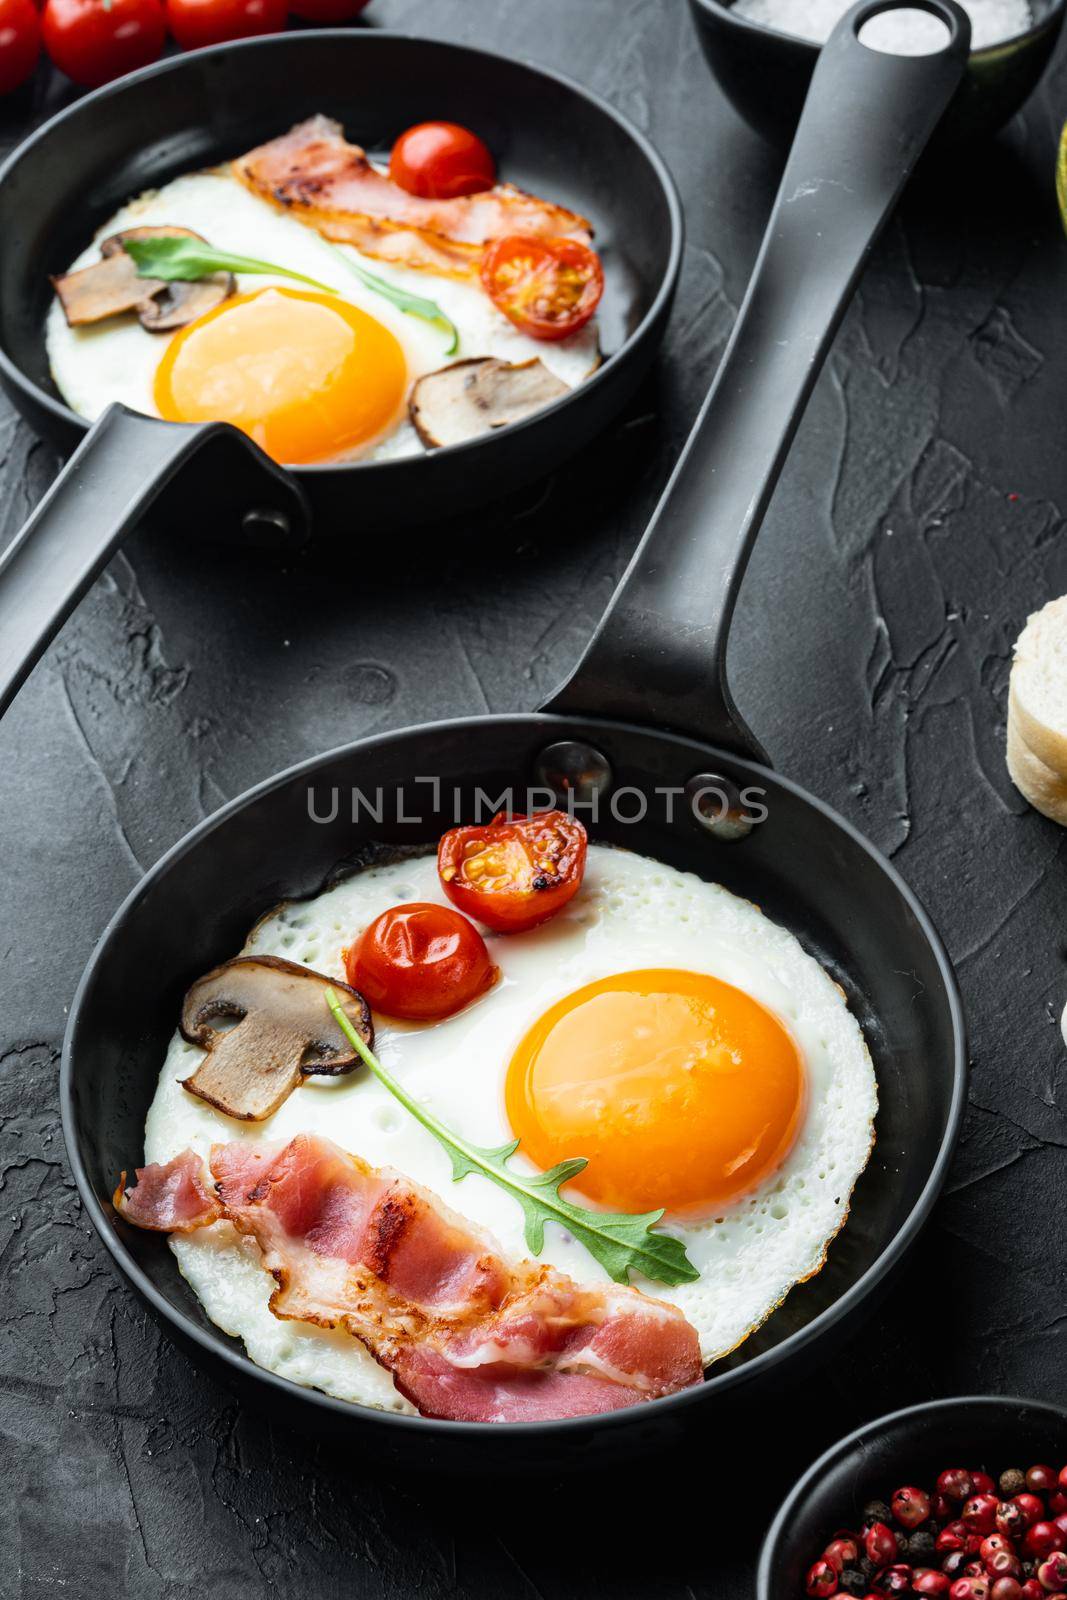 Fried Egg with ingredient in cast iron frying pan, on black background